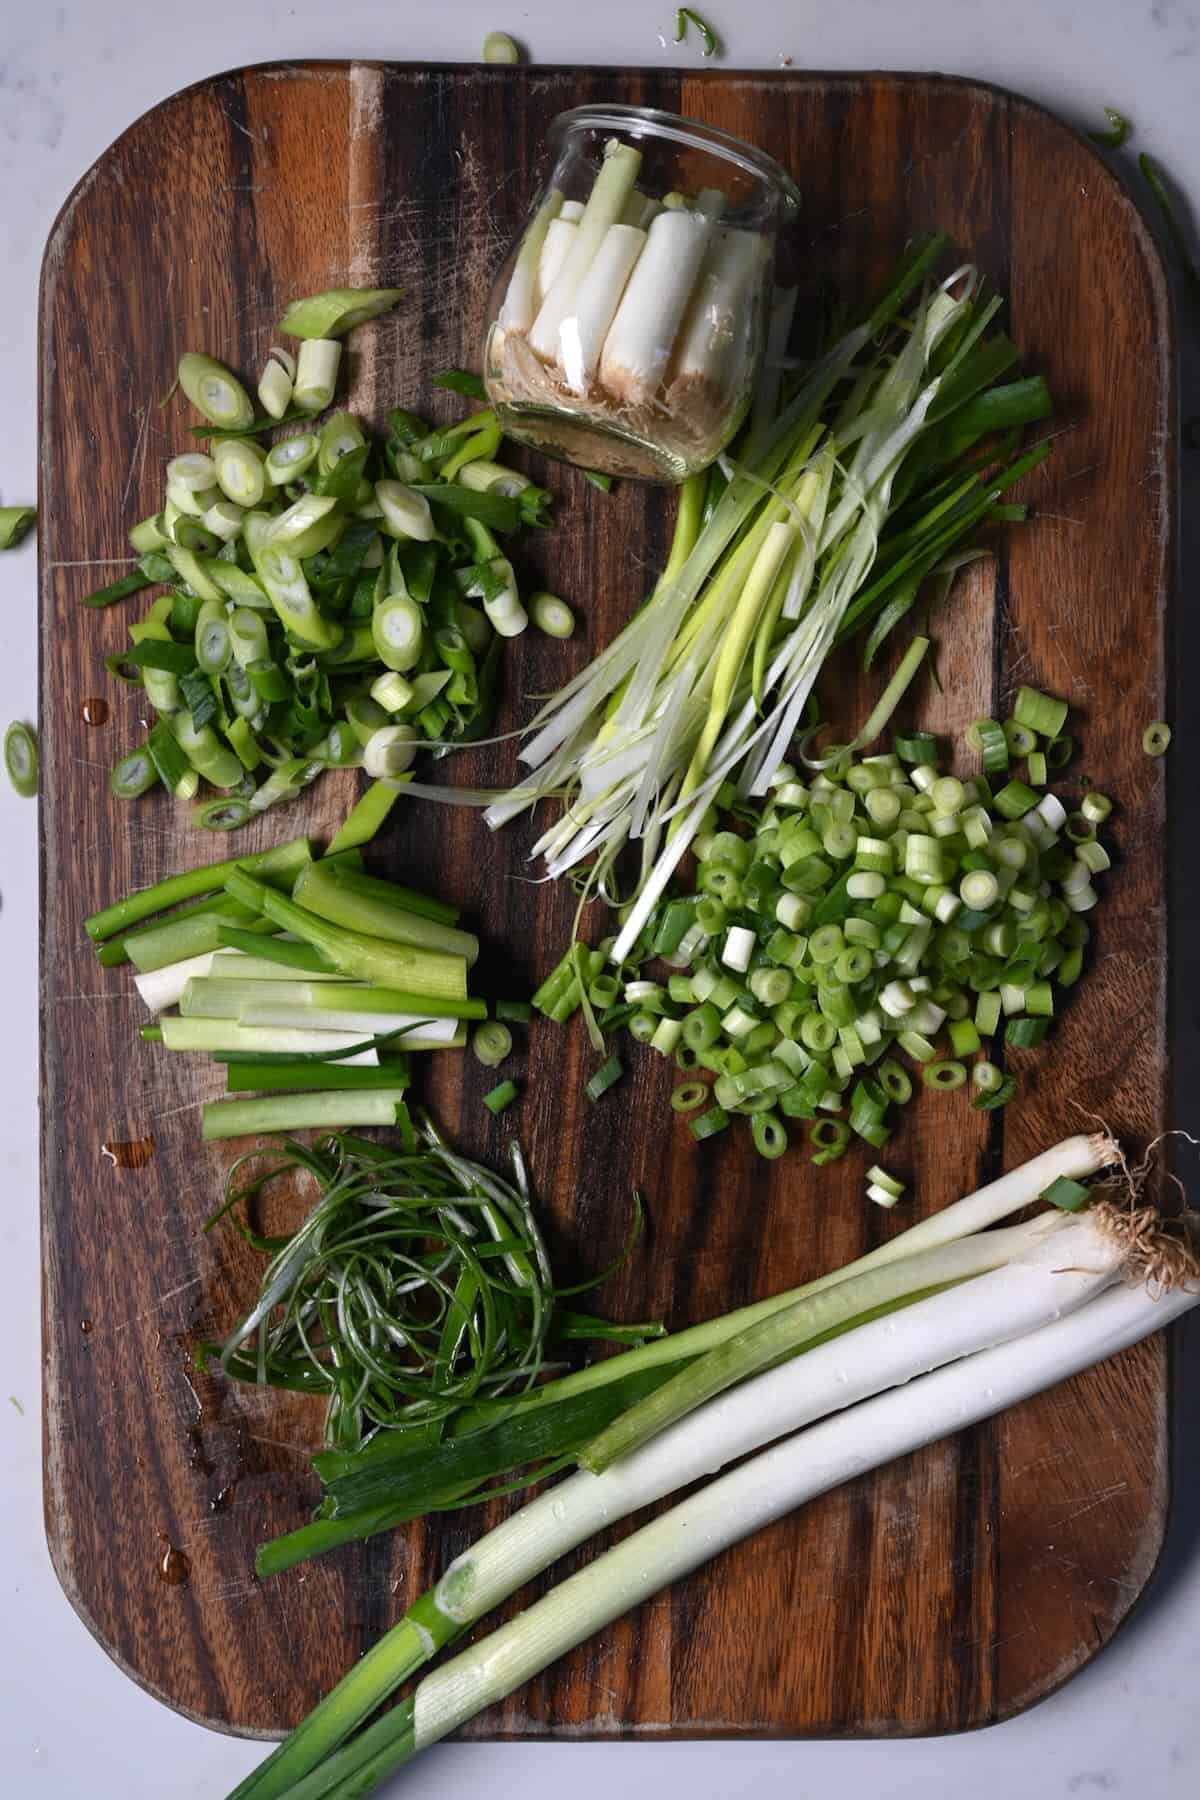 How to Cut a Green Onion {Step-by-Step Tutorial} - FeelGoodFoodie